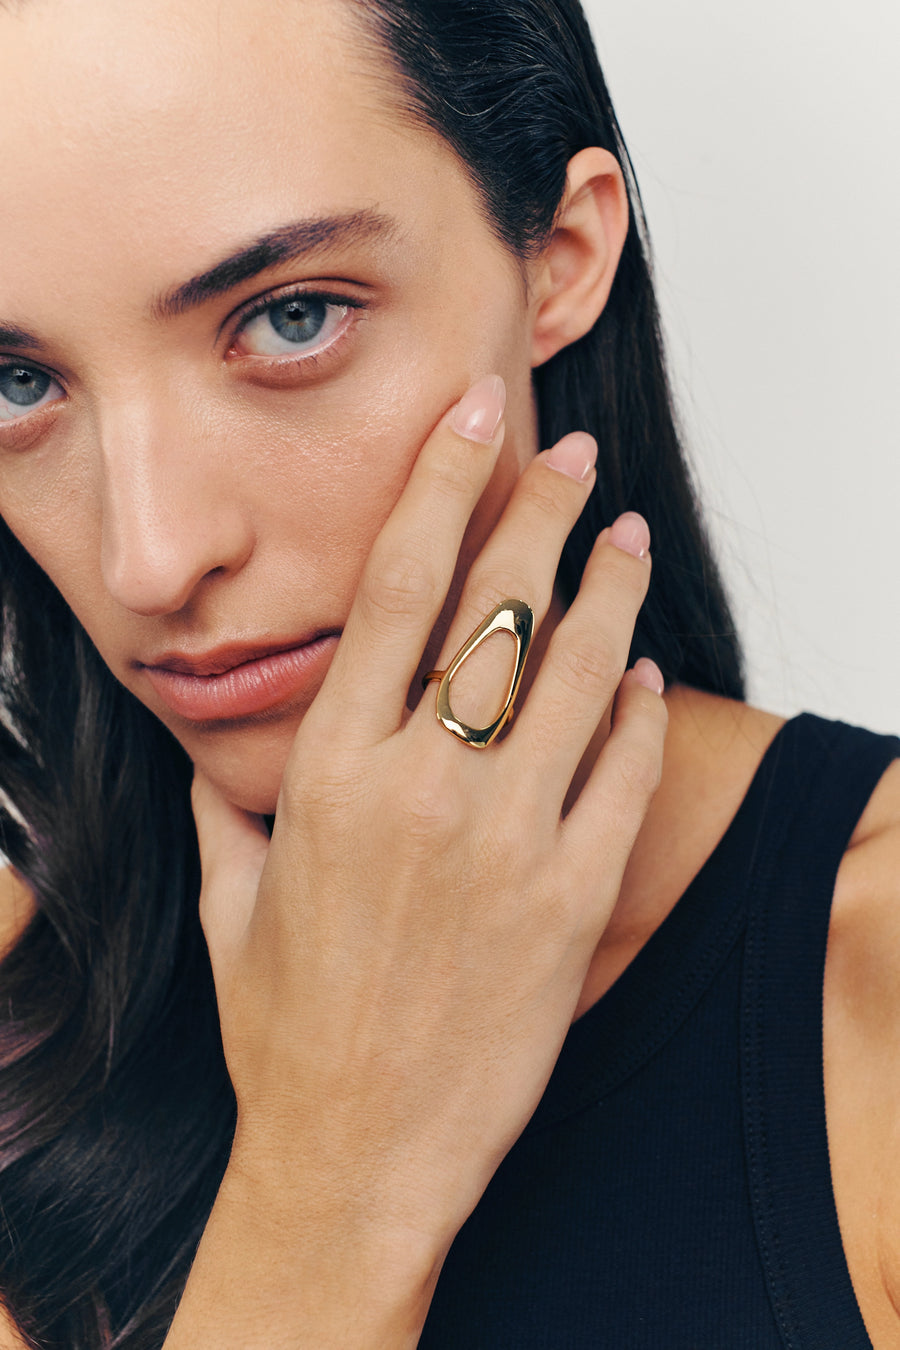 HEXAGON Ring. Elongated hexagon-shaped ring, open-ended, can fit with US sizes 5-7, 18K gold vermeil, handmade, hypoallergenic, water-resistant